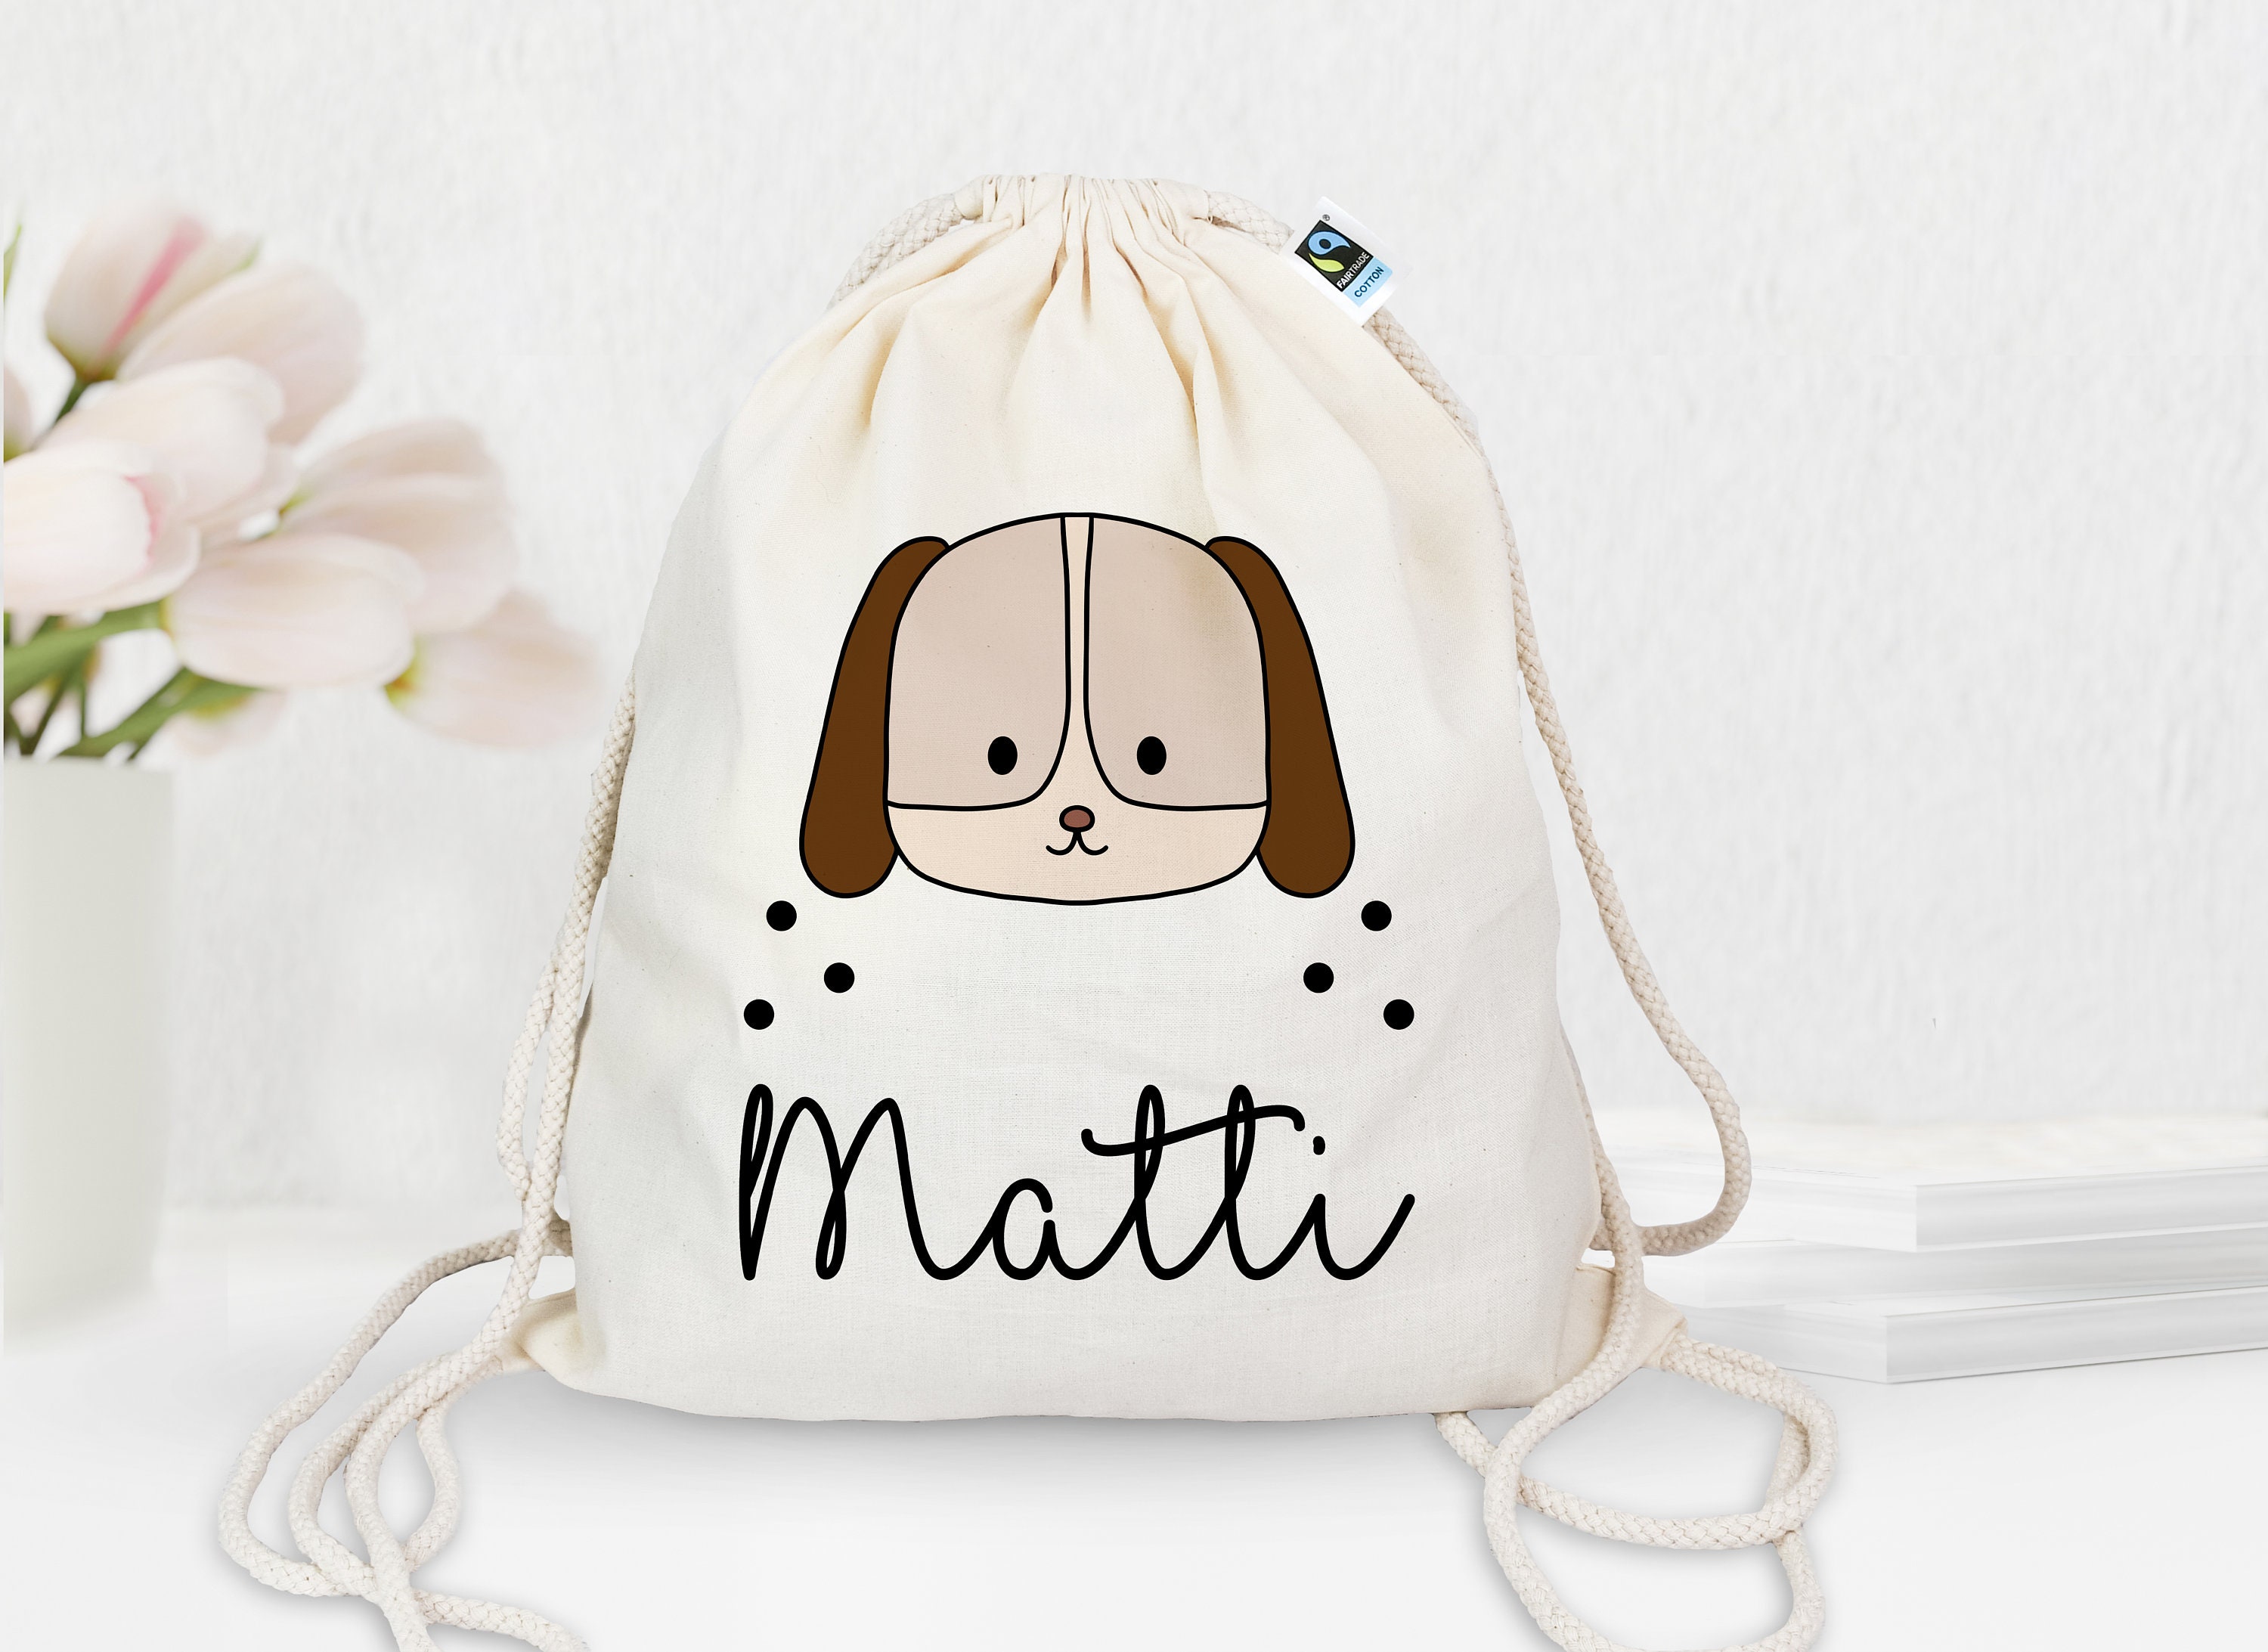 Personalized Gym Bag Made of Organic Cotton With Desired Name Dog